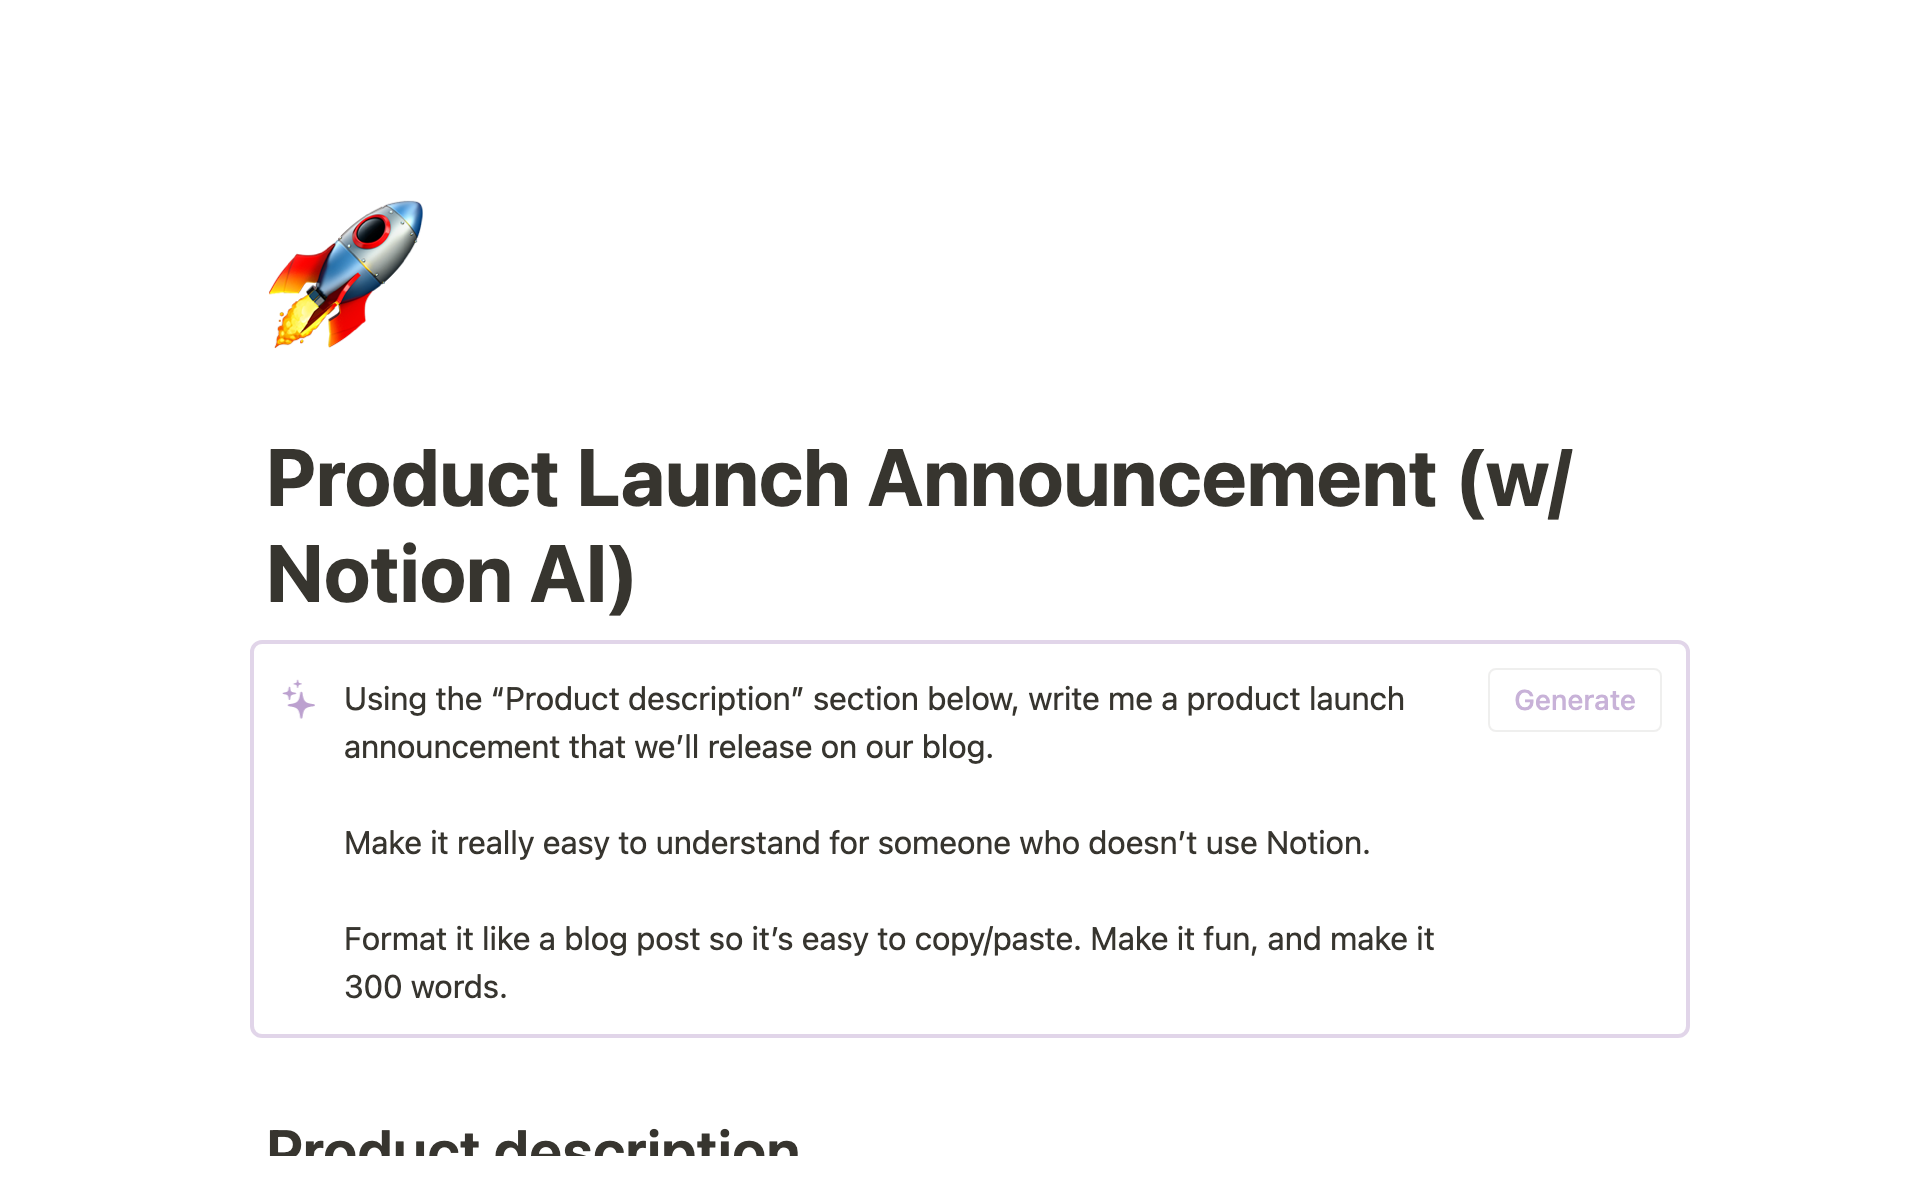 A screenshot of a Product Launch Announcement use case using Notion AI.